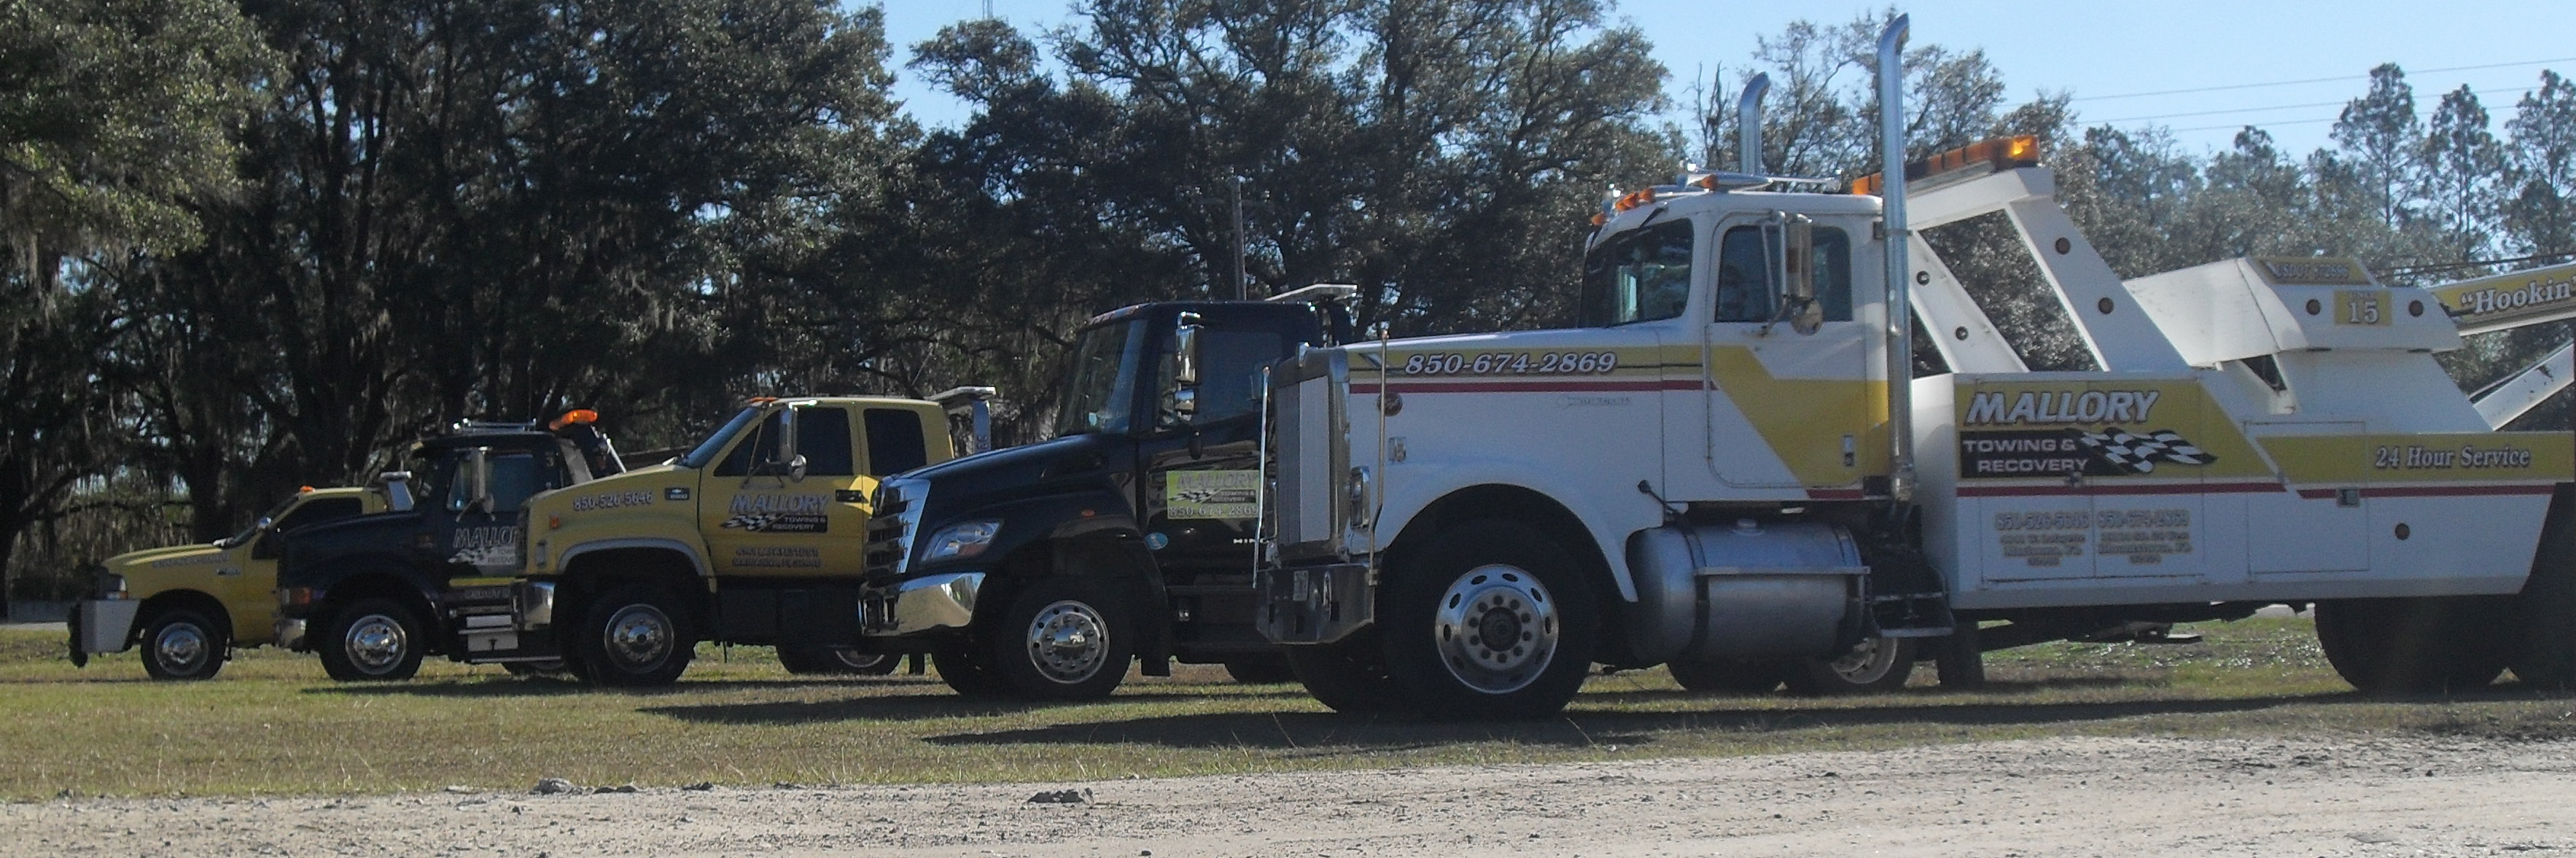 Mallory Towing & Recovery Towing.com Profile Banner